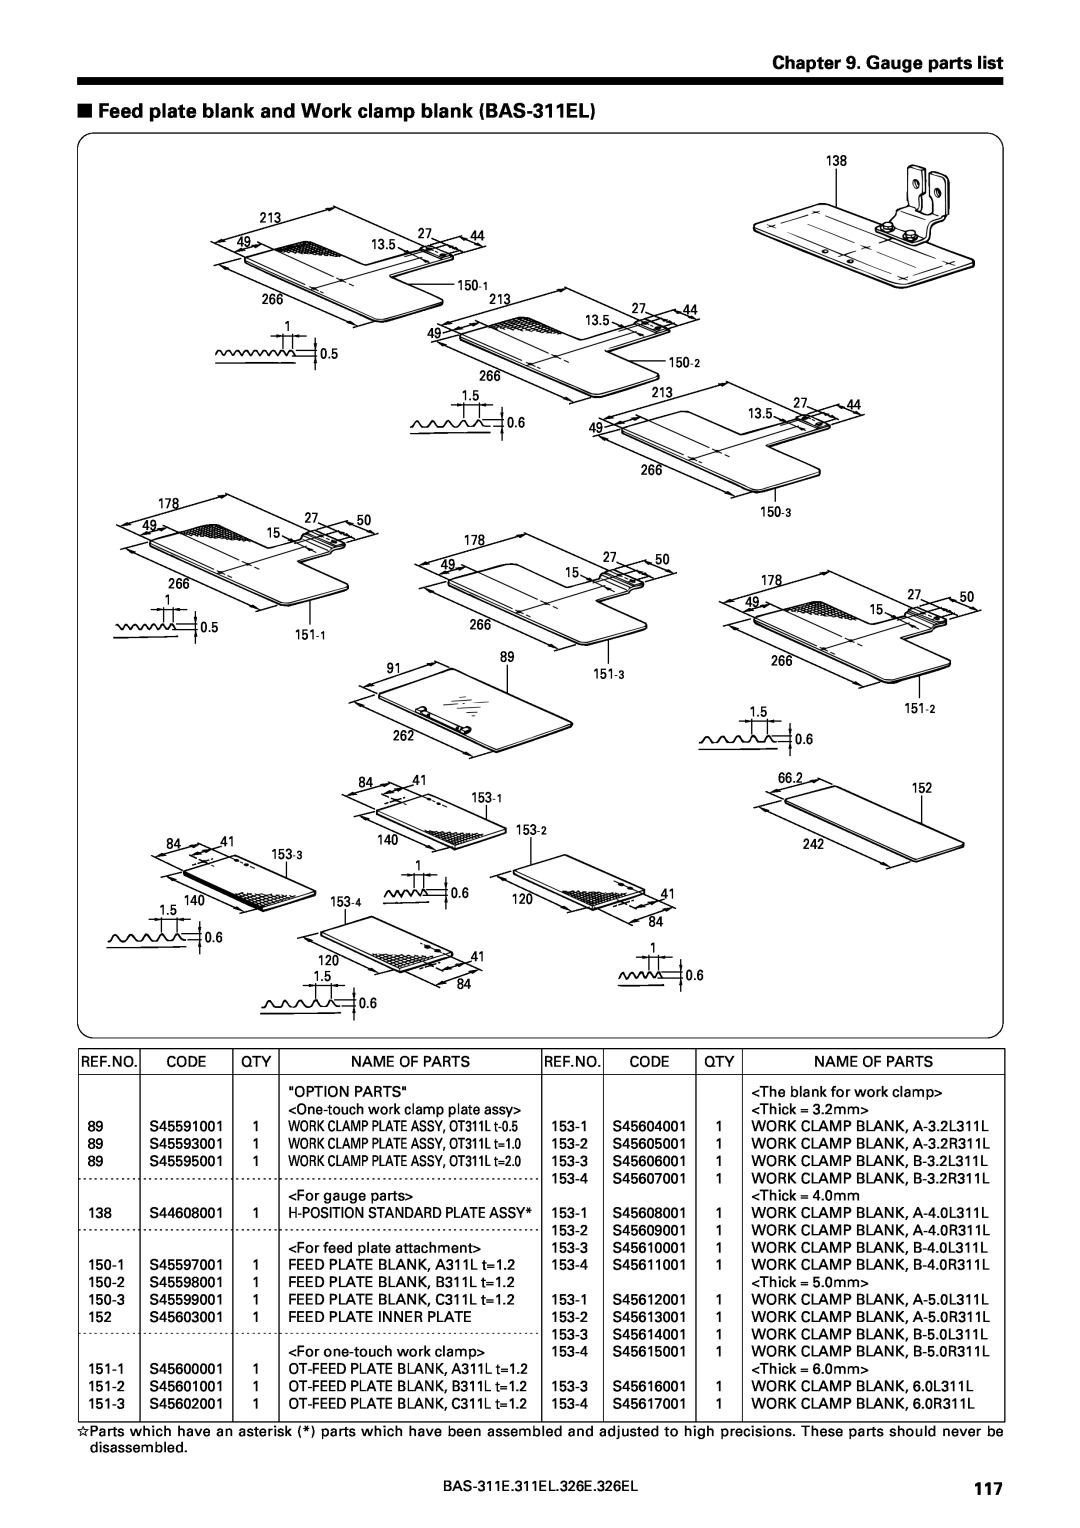 Brother service manual Feed plate blank and Work clamp blank BAS-311EL, Gauge parts list 